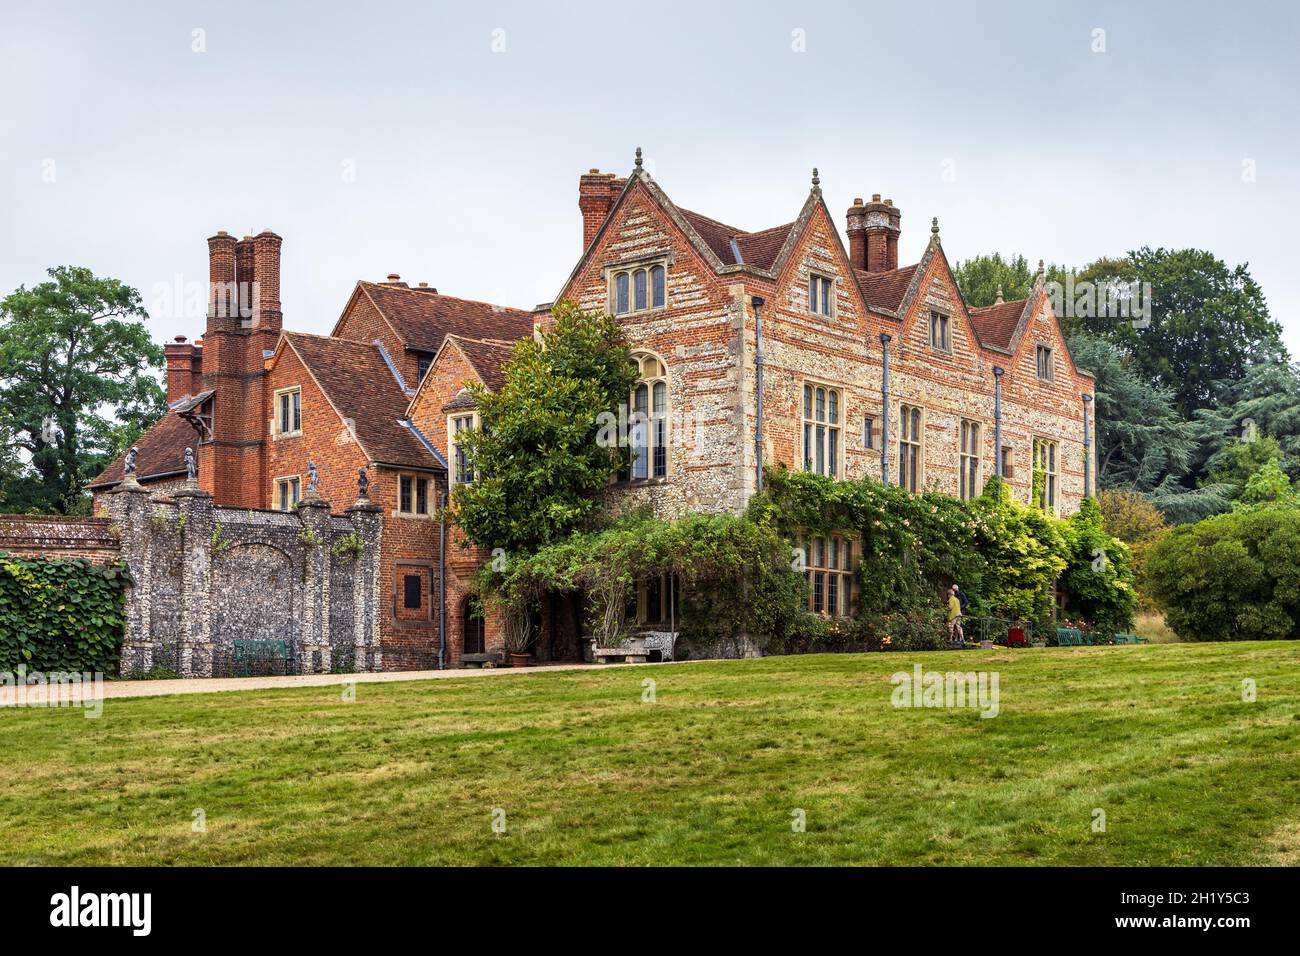 Greys Court in Oxfordshire, a 16th century Tudor country house mentioned in the Domesday Book 1086 and formerly the home of the Brunner family. Stock Photo